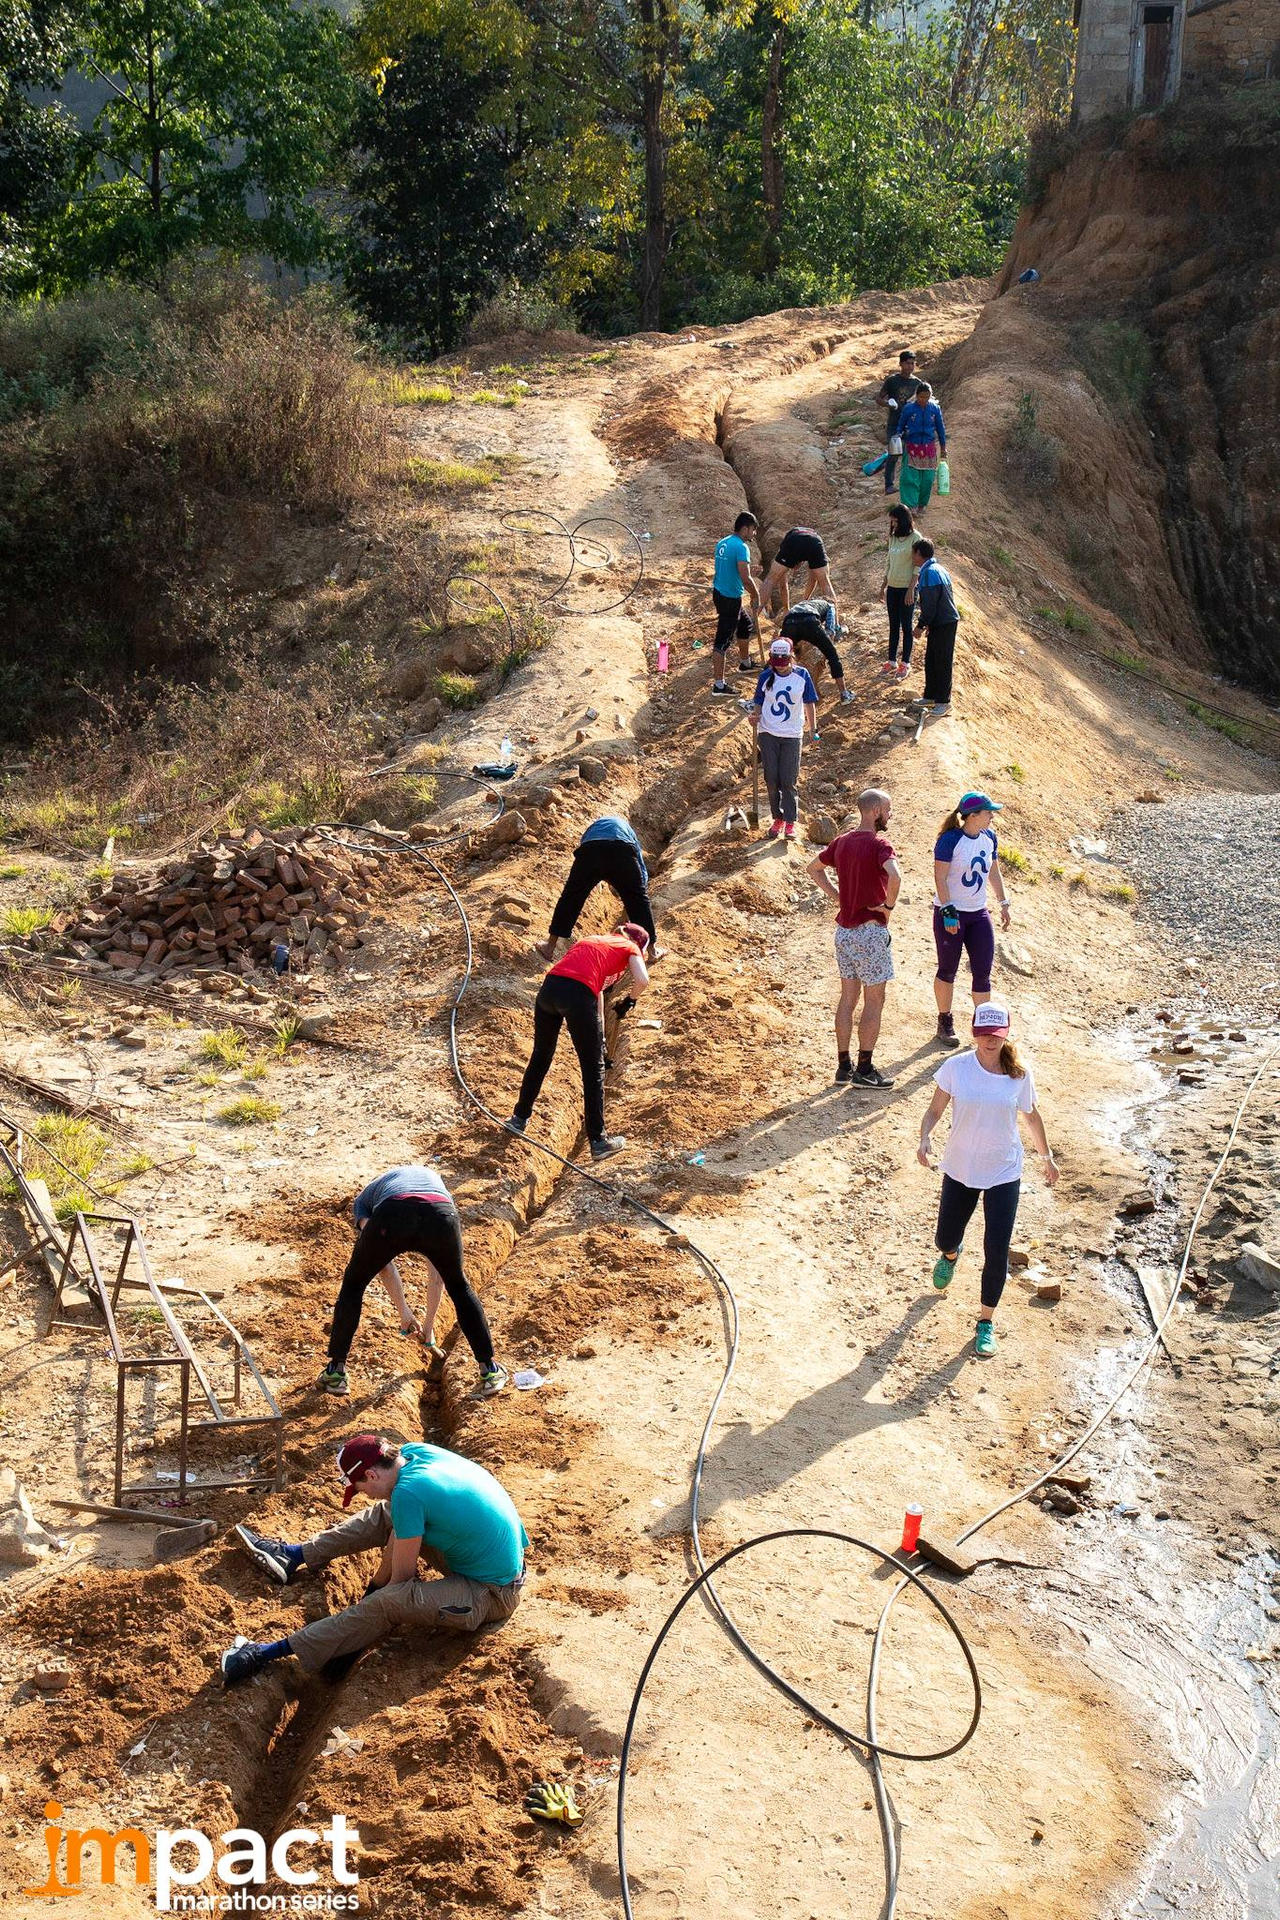 In Nepal, the week before the marathon was tough but extremely rewarding. The runners joined forces to construct a water filtration unit and pipeline that will supply the entire village with clean drinking water. Photo: Adam Dickens